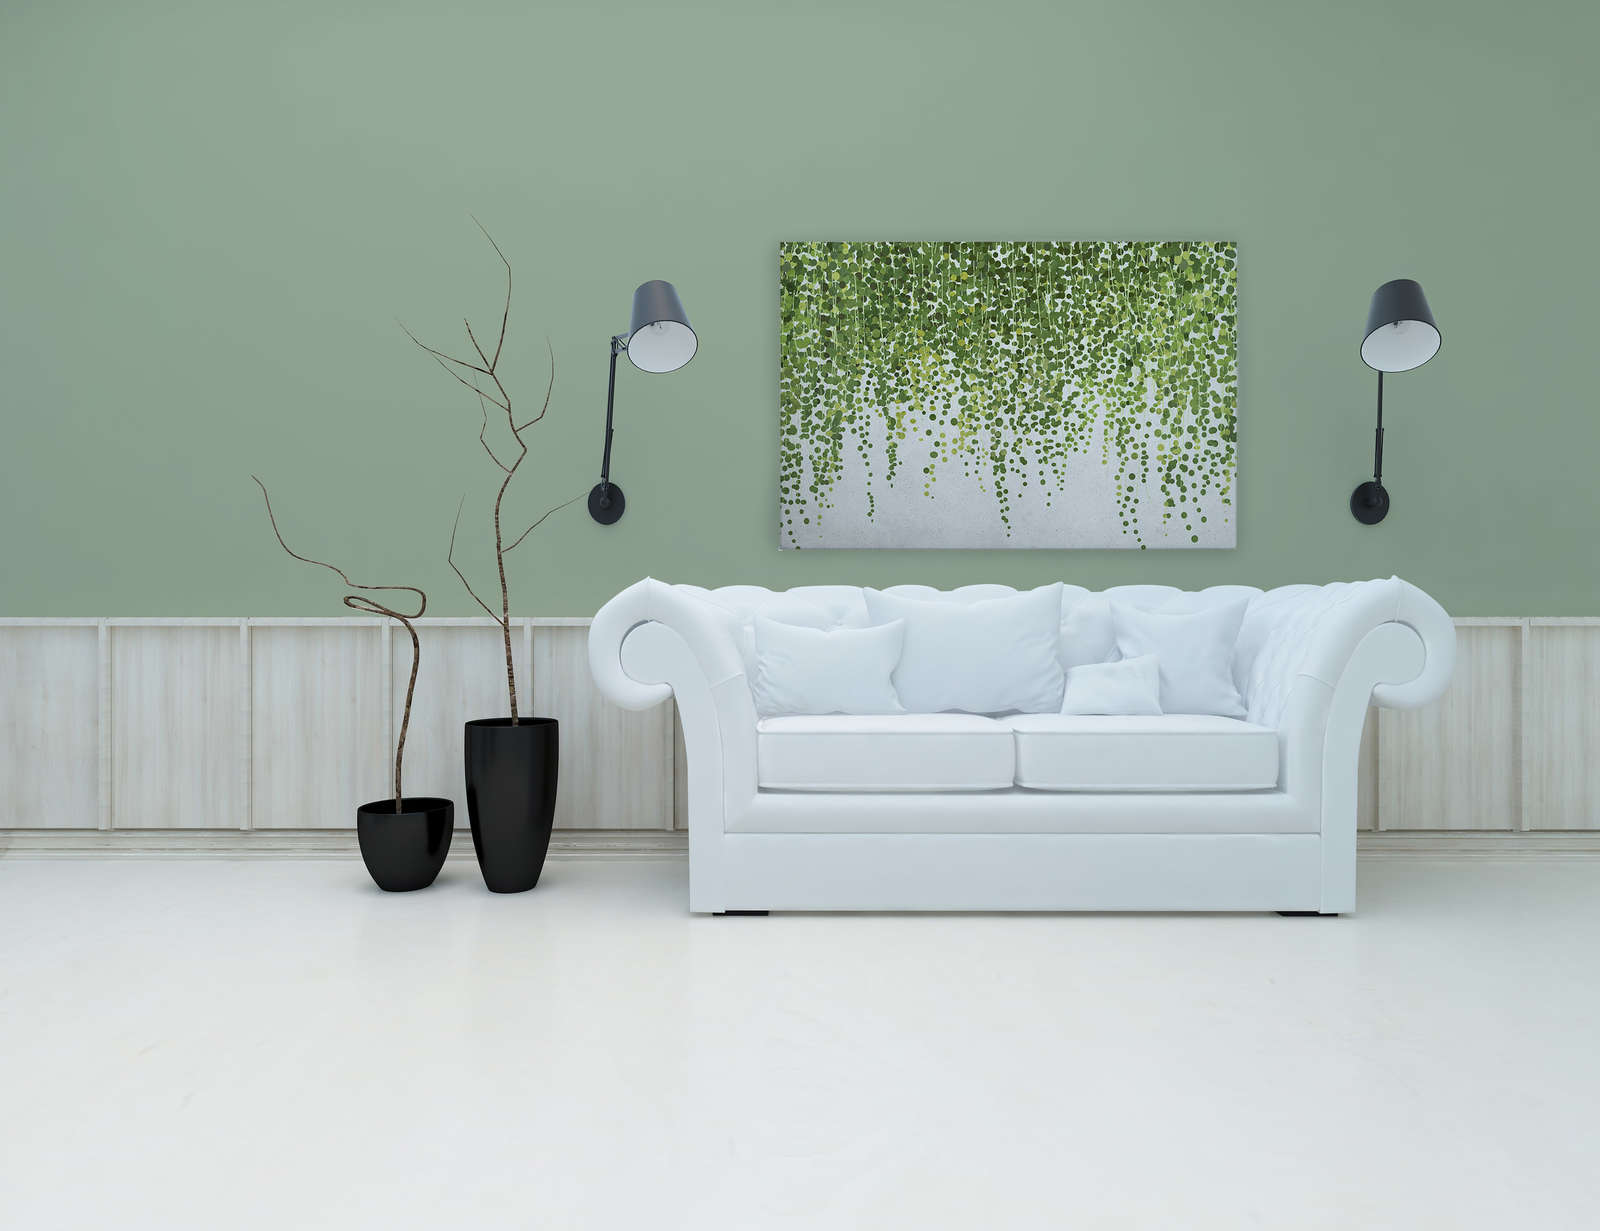             Hanging Garden 1 - Canvas painting Leaves vines, hanging garden in concrete look - 1.20 m x 0.80 m
        